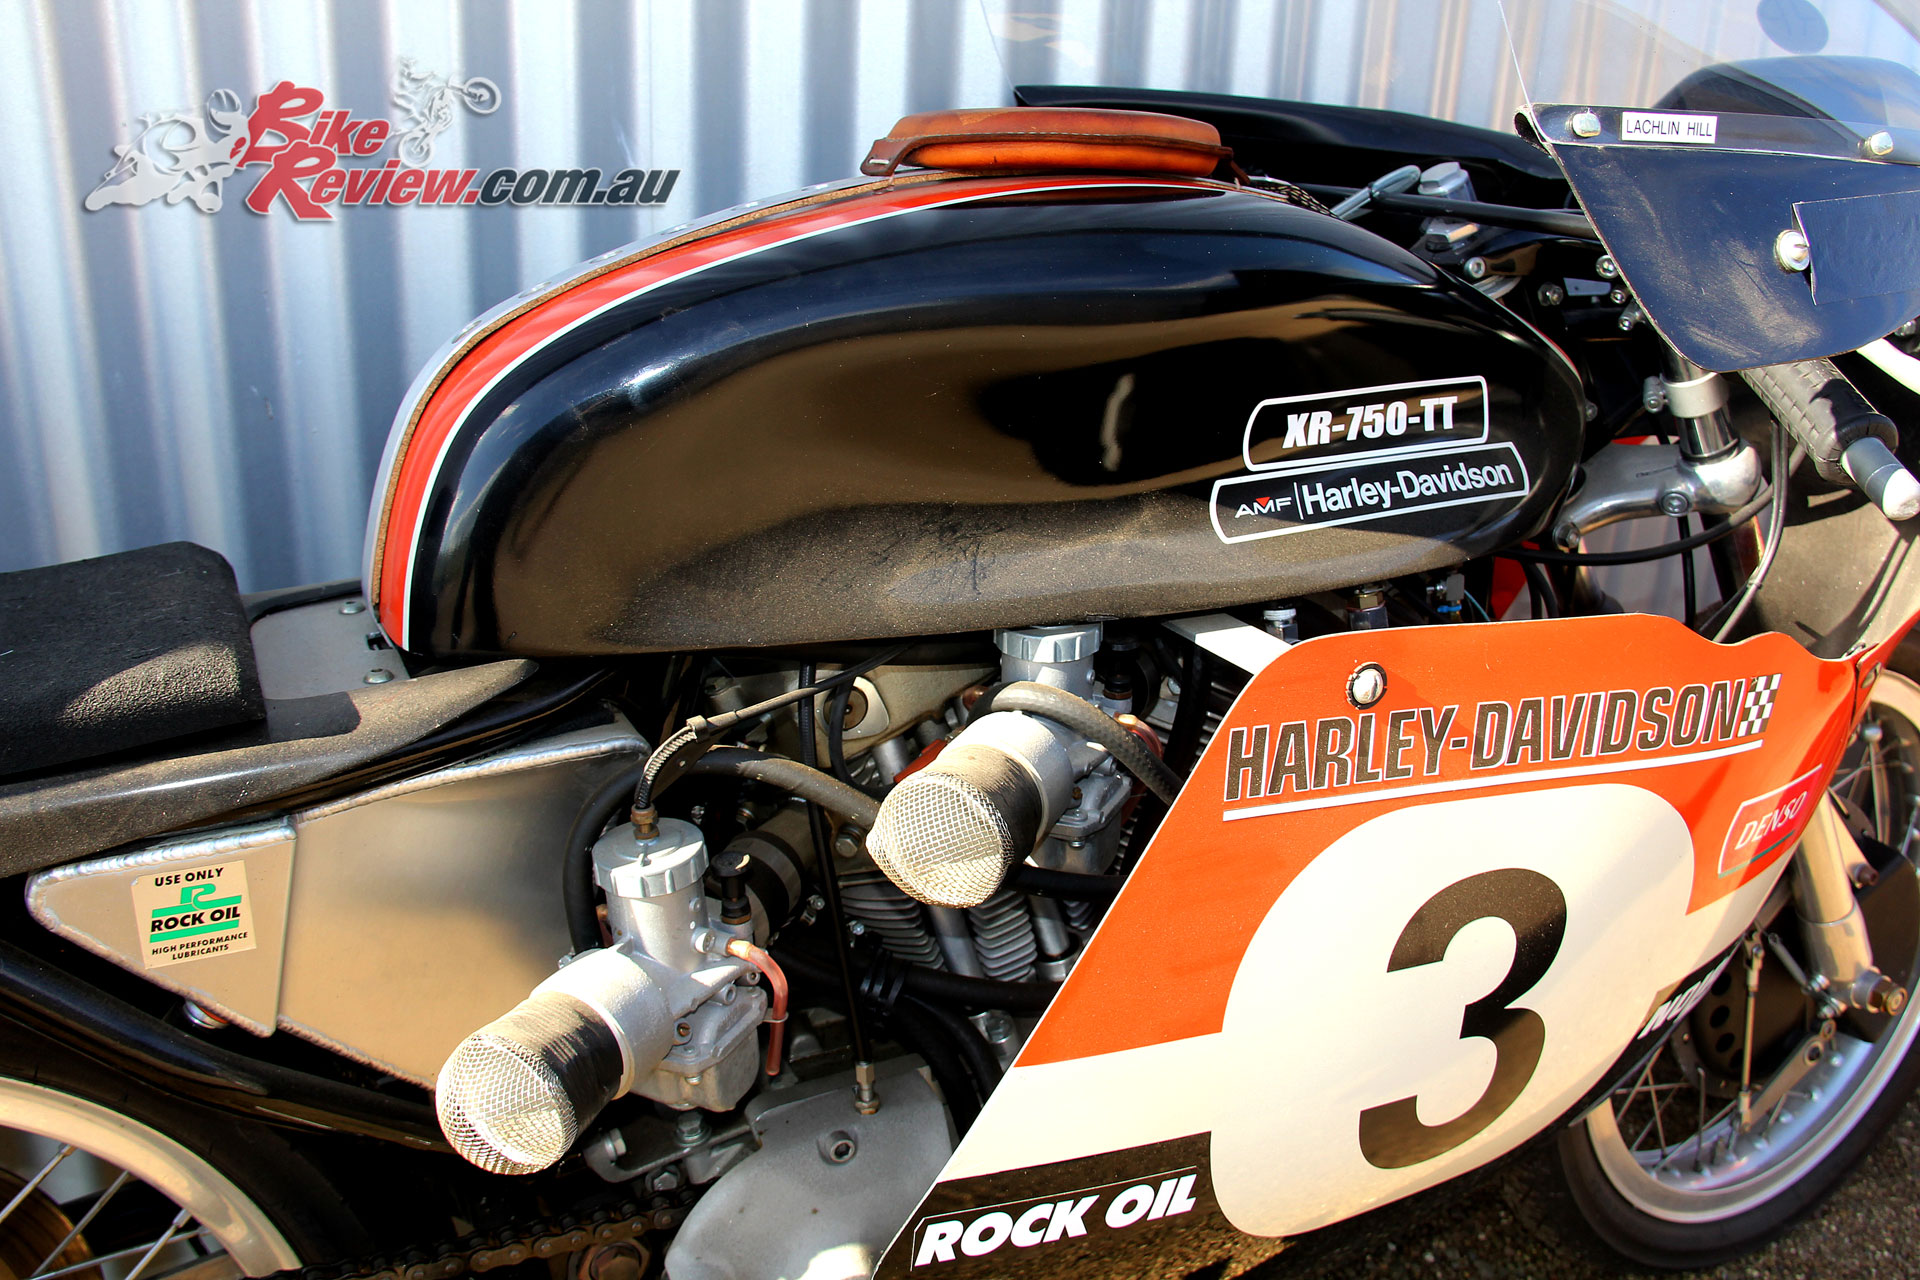 While many today think of Harley's as cruisers they have a strong heritage of racing